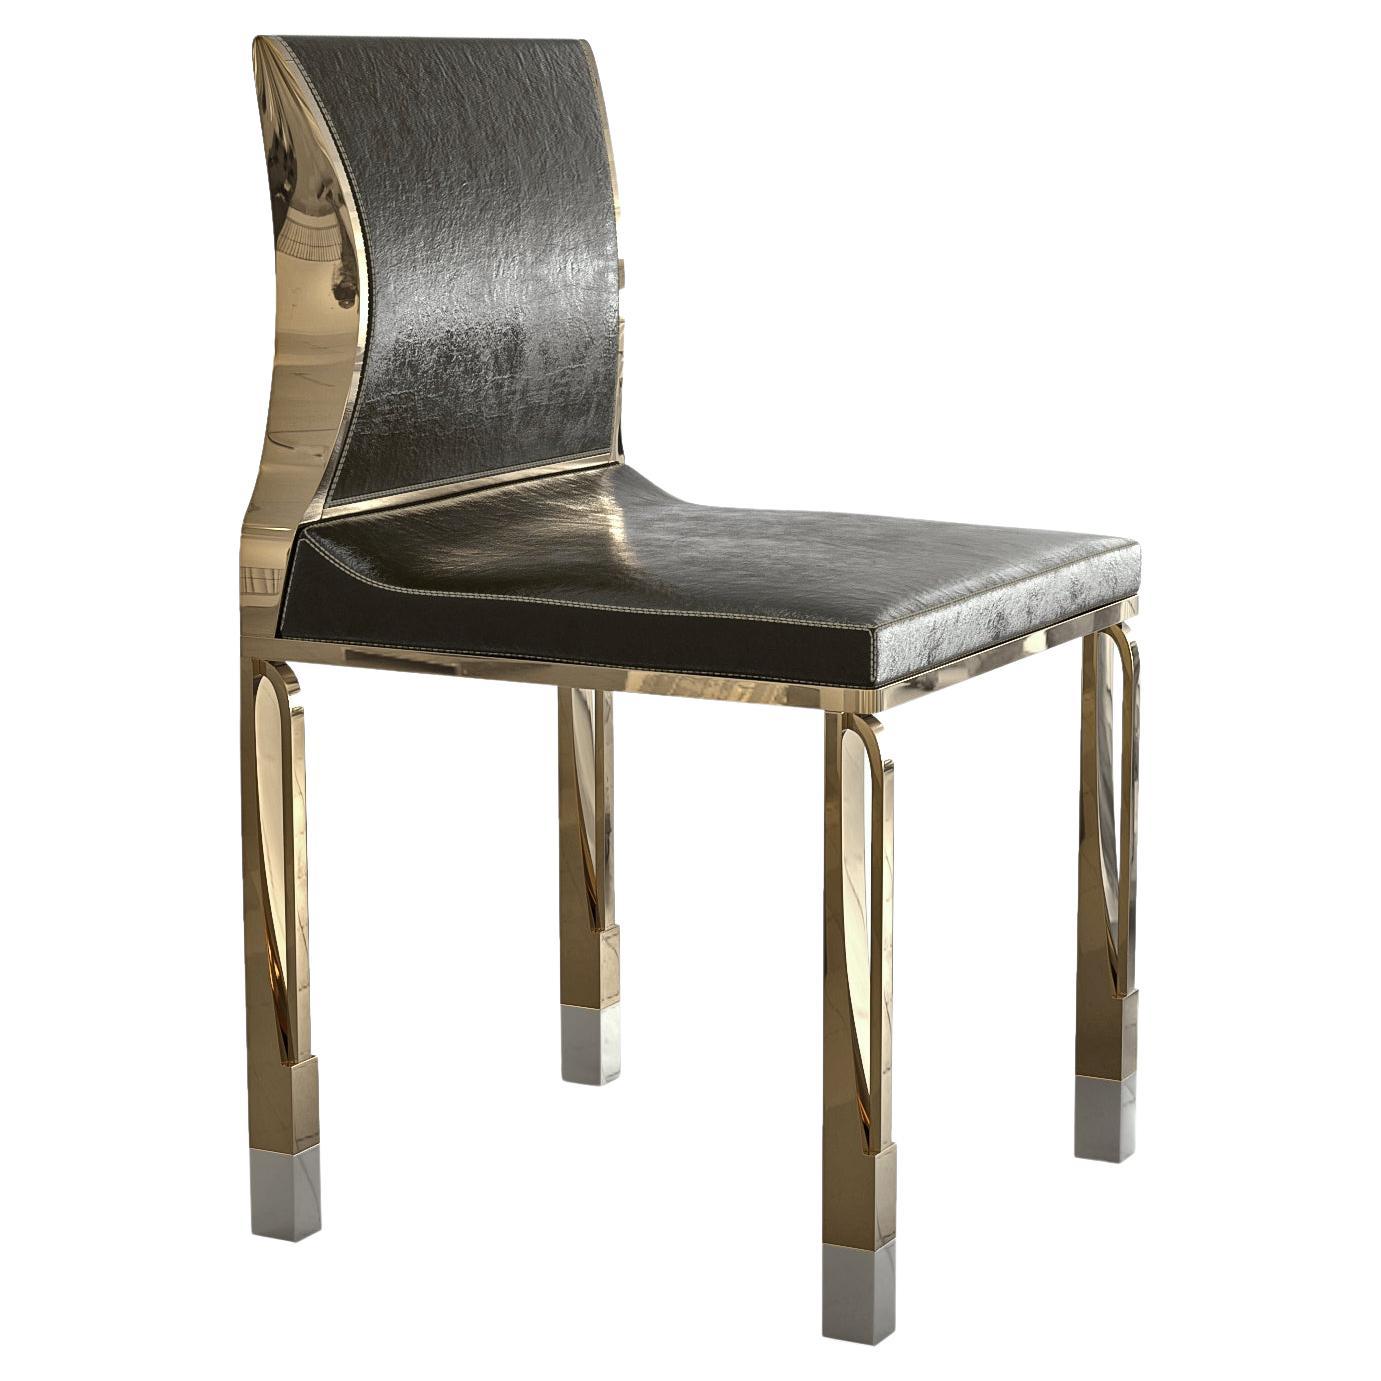 "Pagina" Chair with Bronze, Istanbul